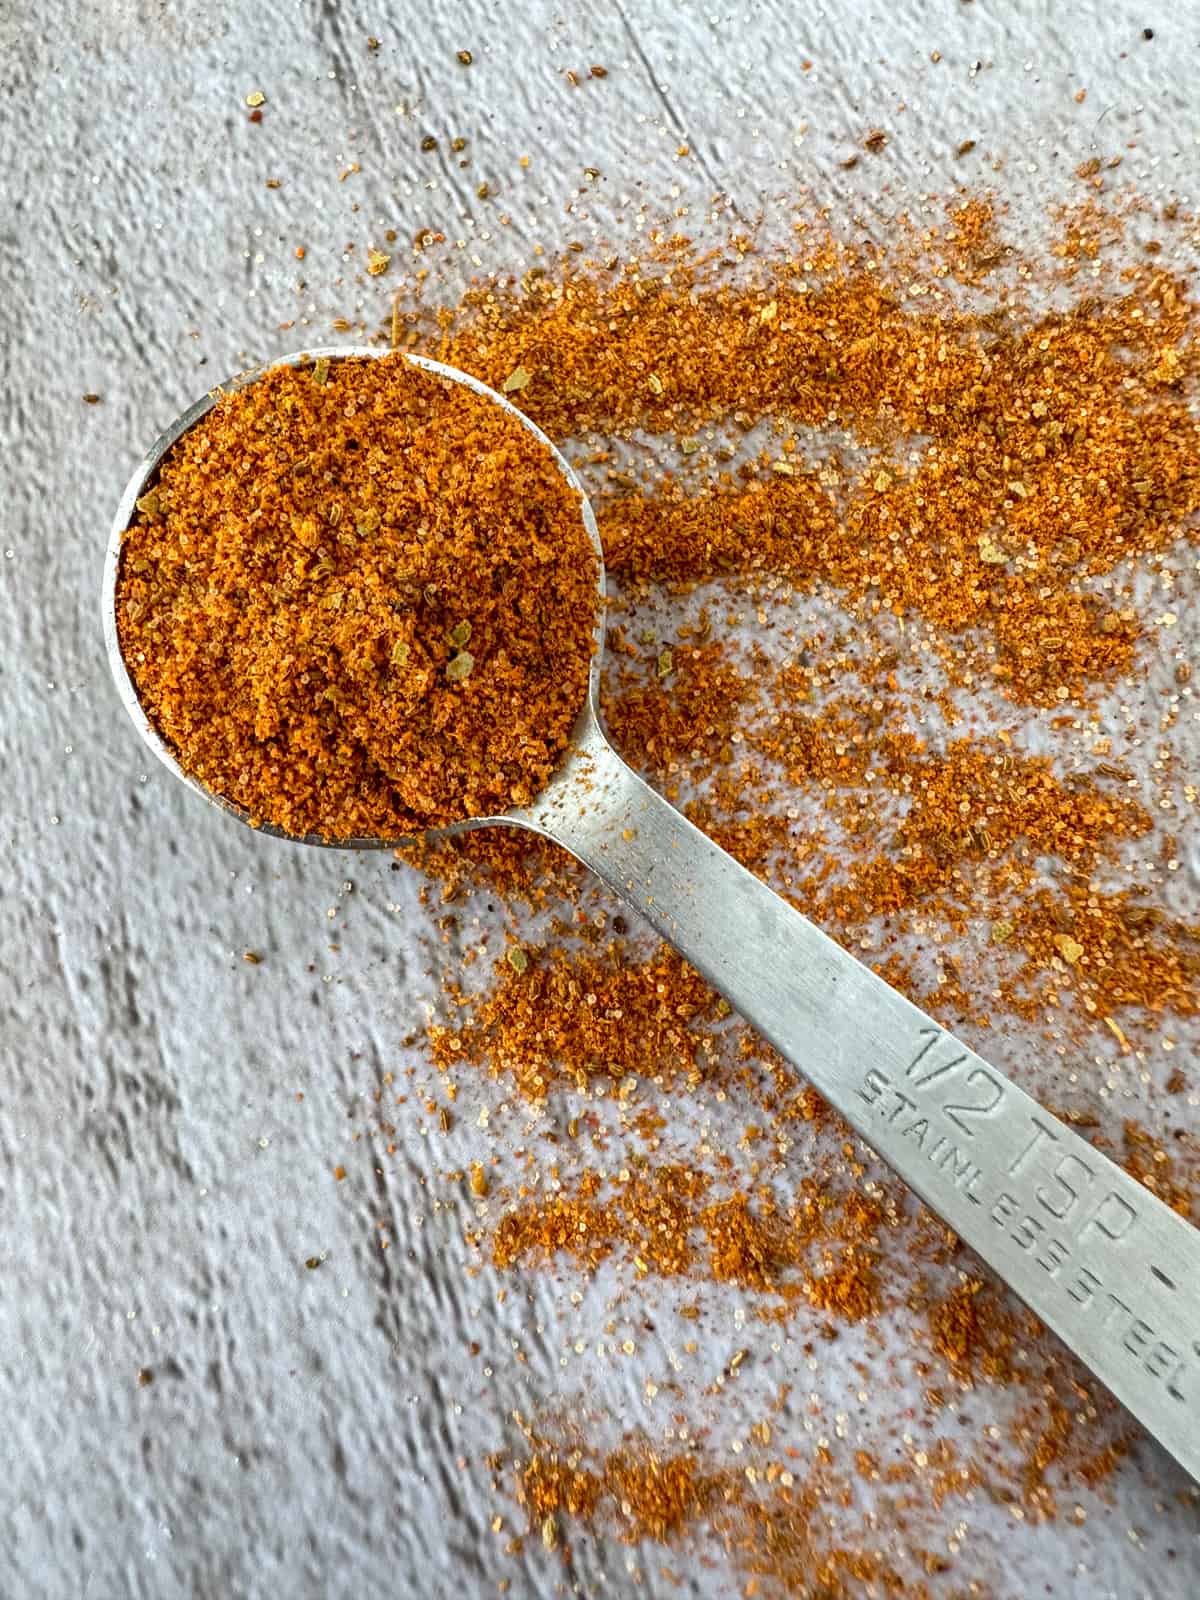 old bay seasoning in a measuring spoon and spilled on a table